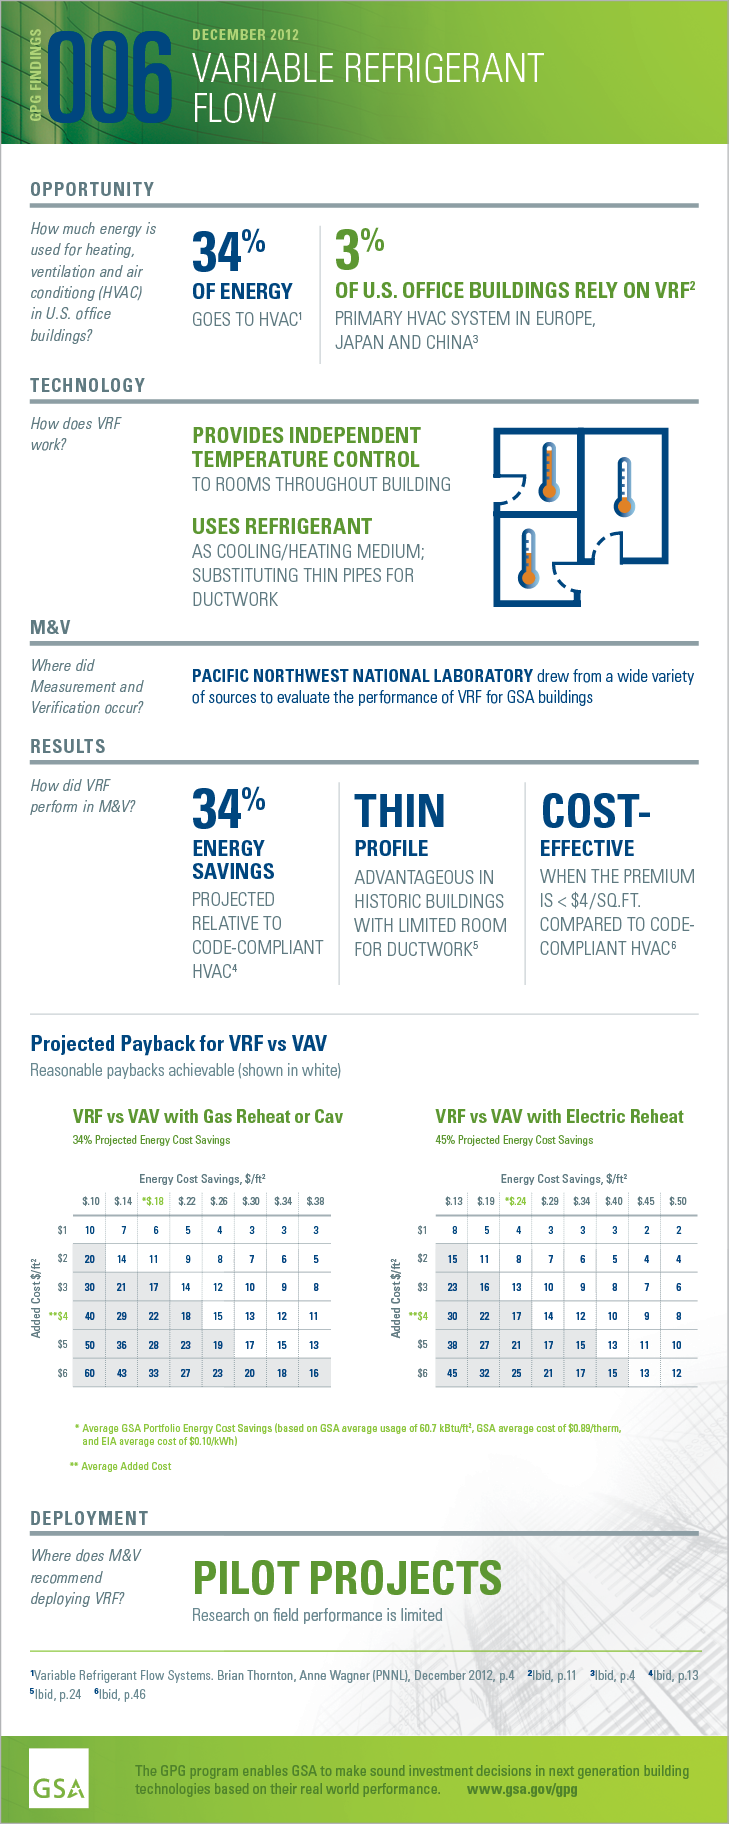 Download the PDF of the full-size infographic for GPG006 Variable Refrigerant Flow.